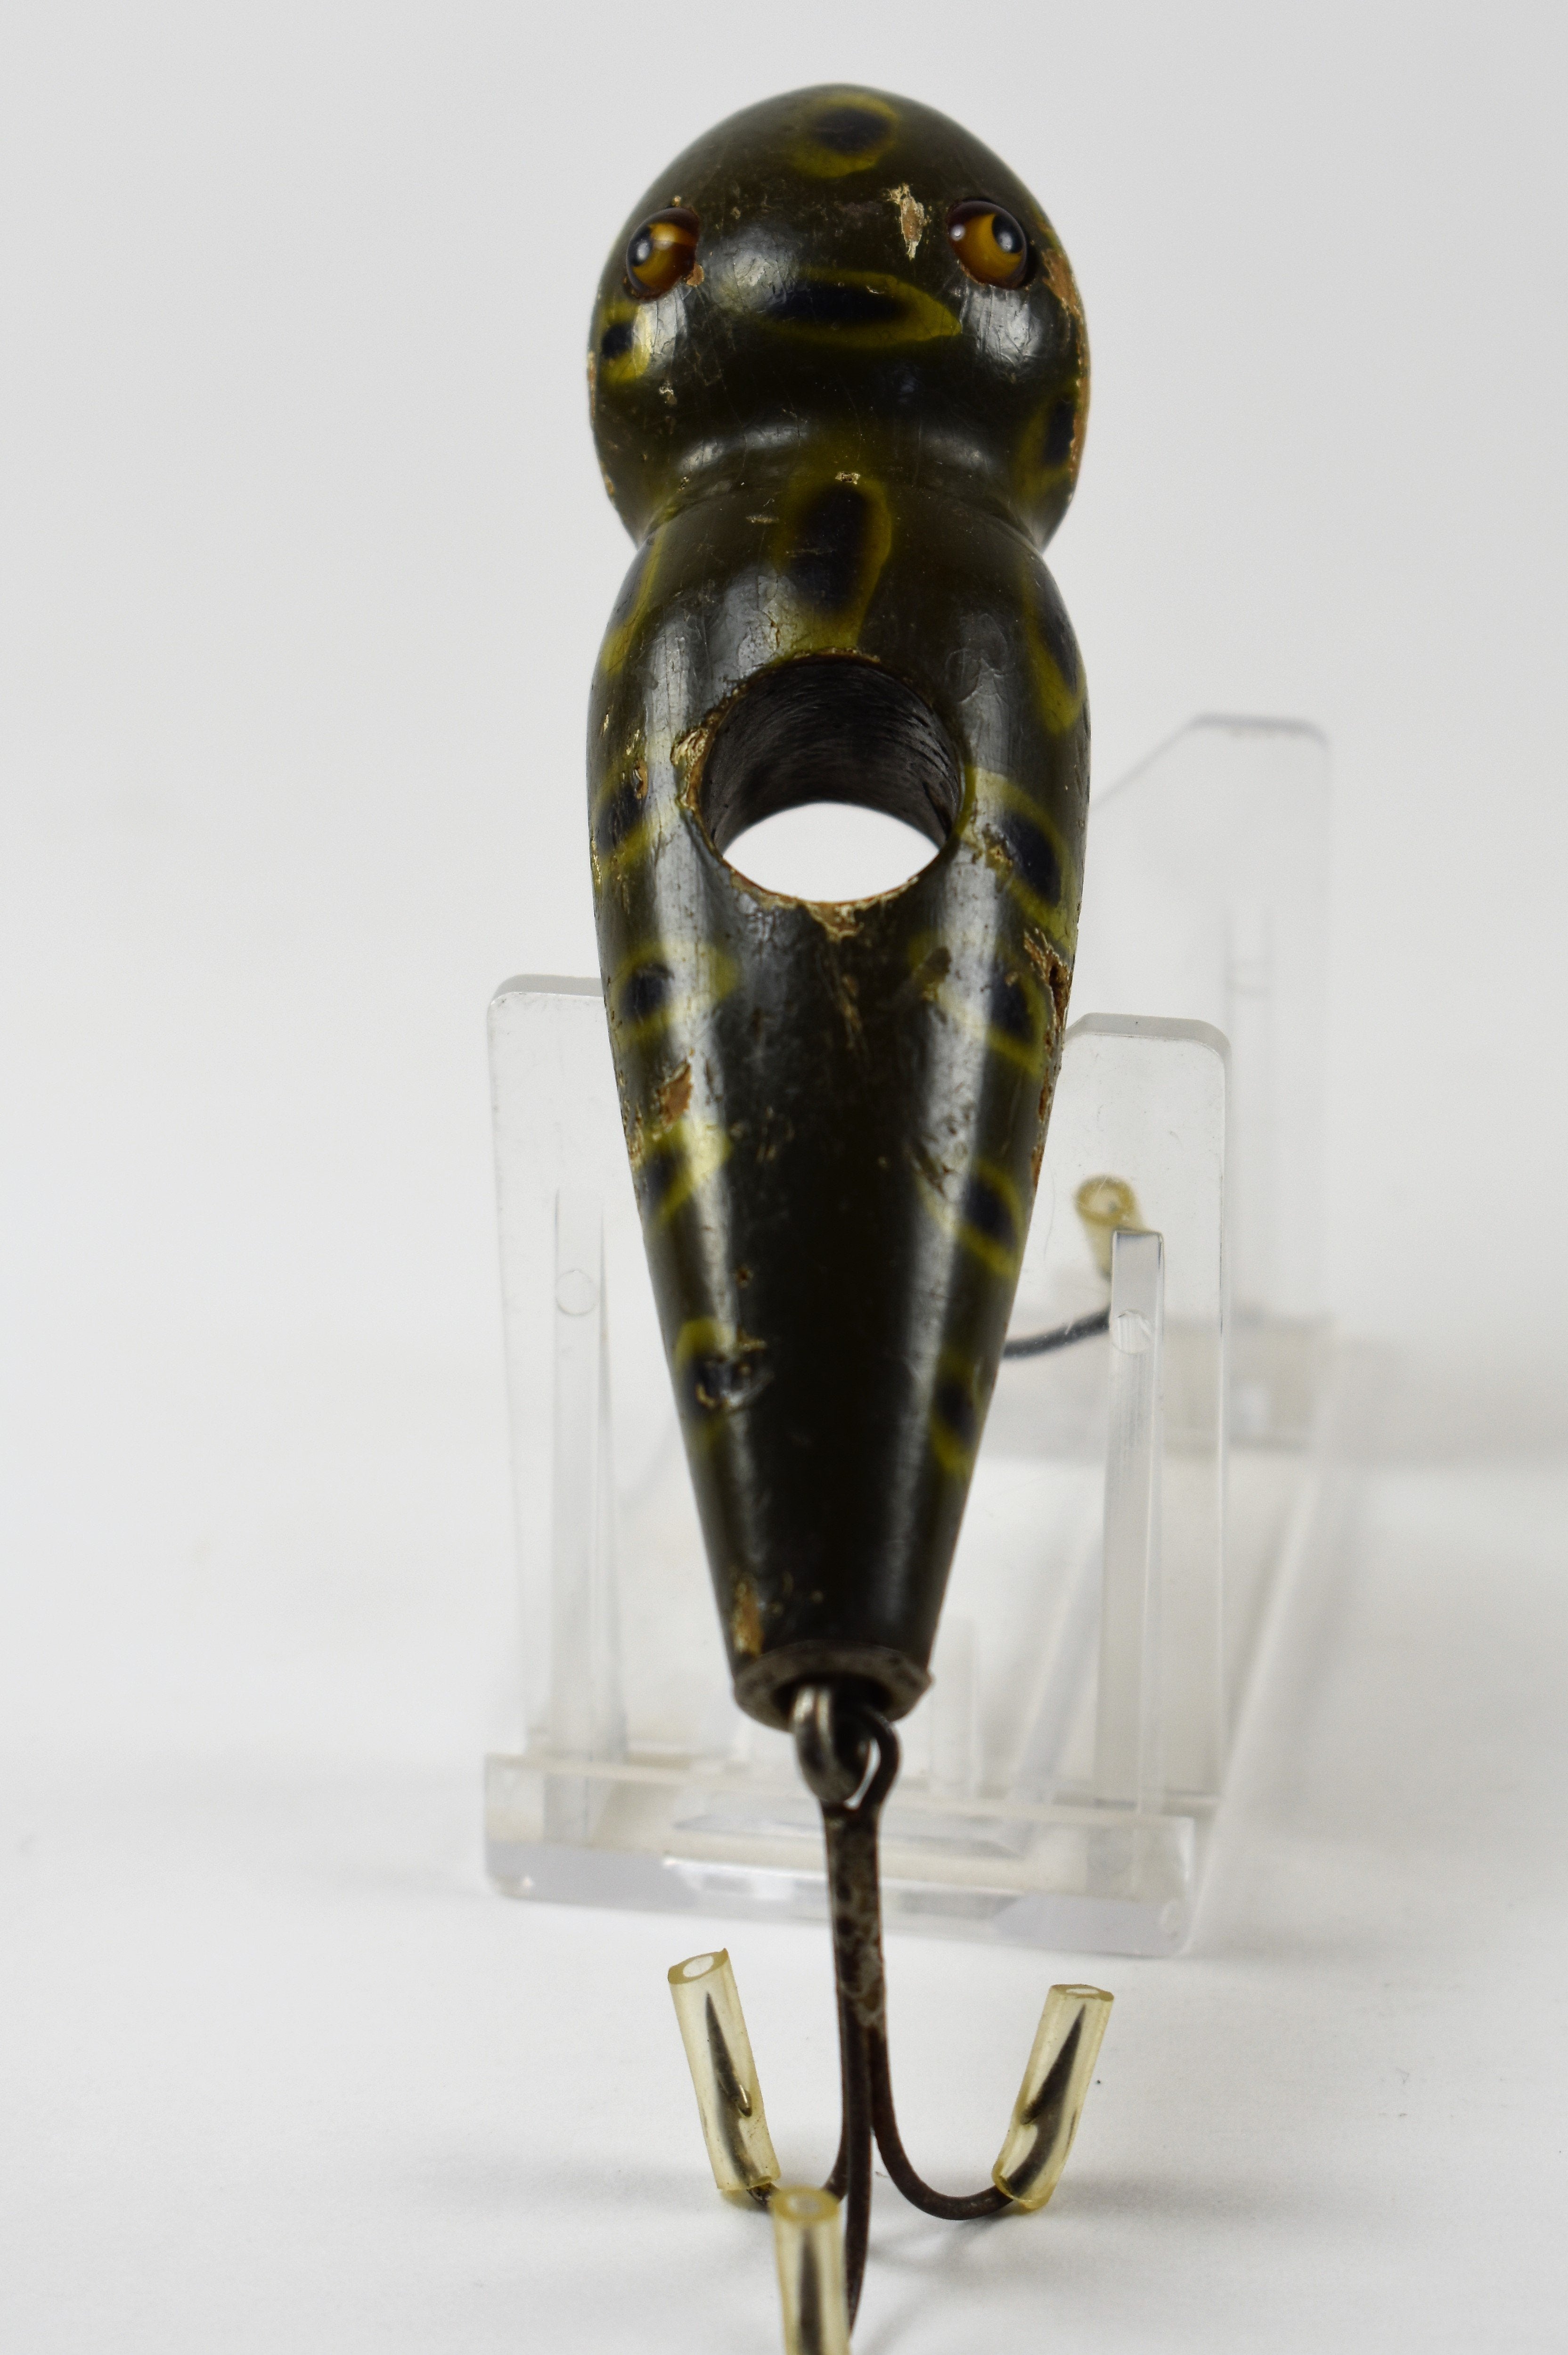 I need help identifying this old vintage lure